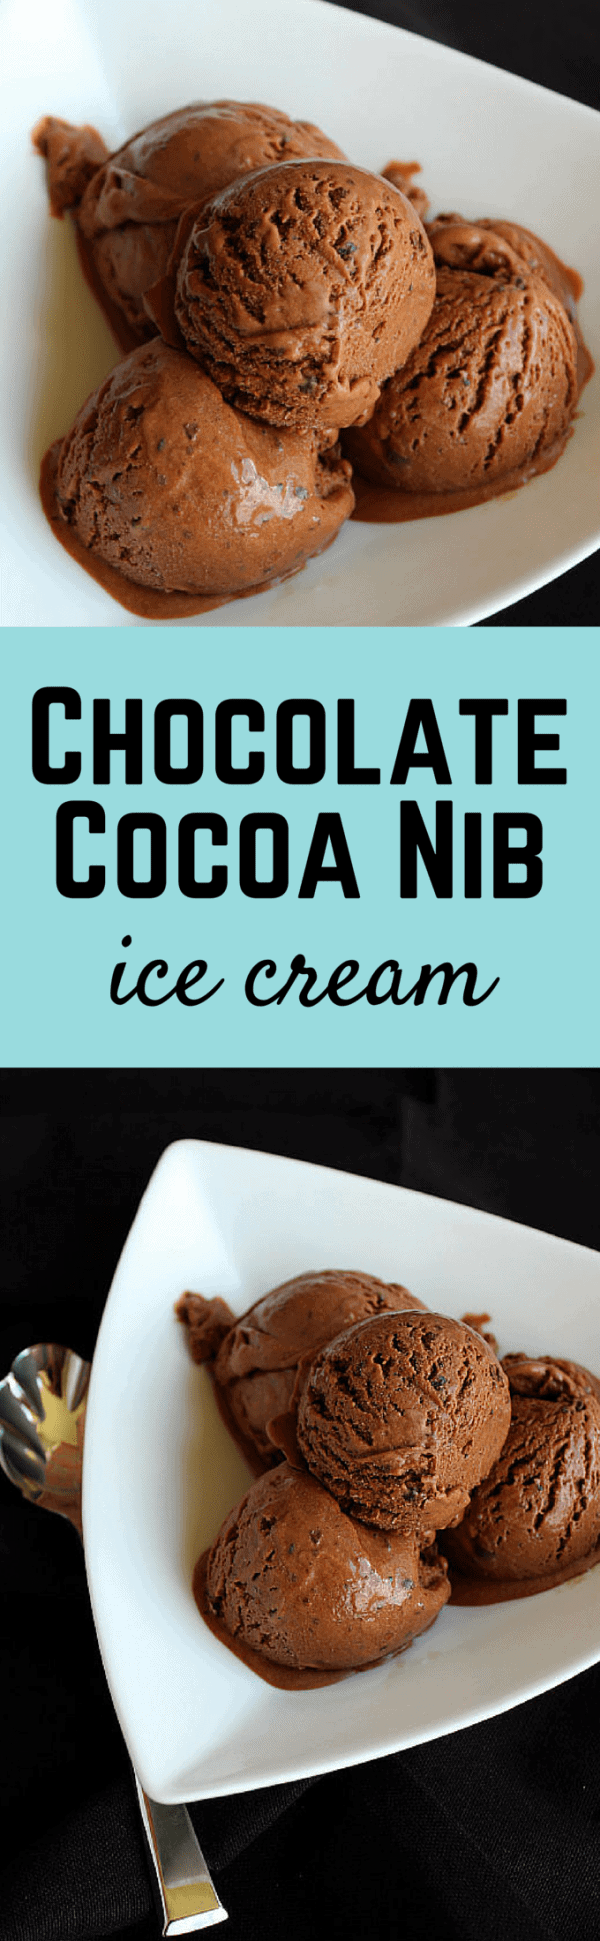 Chocolate Cocoa Nib Ice Cream - this one is for the chocolate lover! Get the recipe on RachelCooks.com!